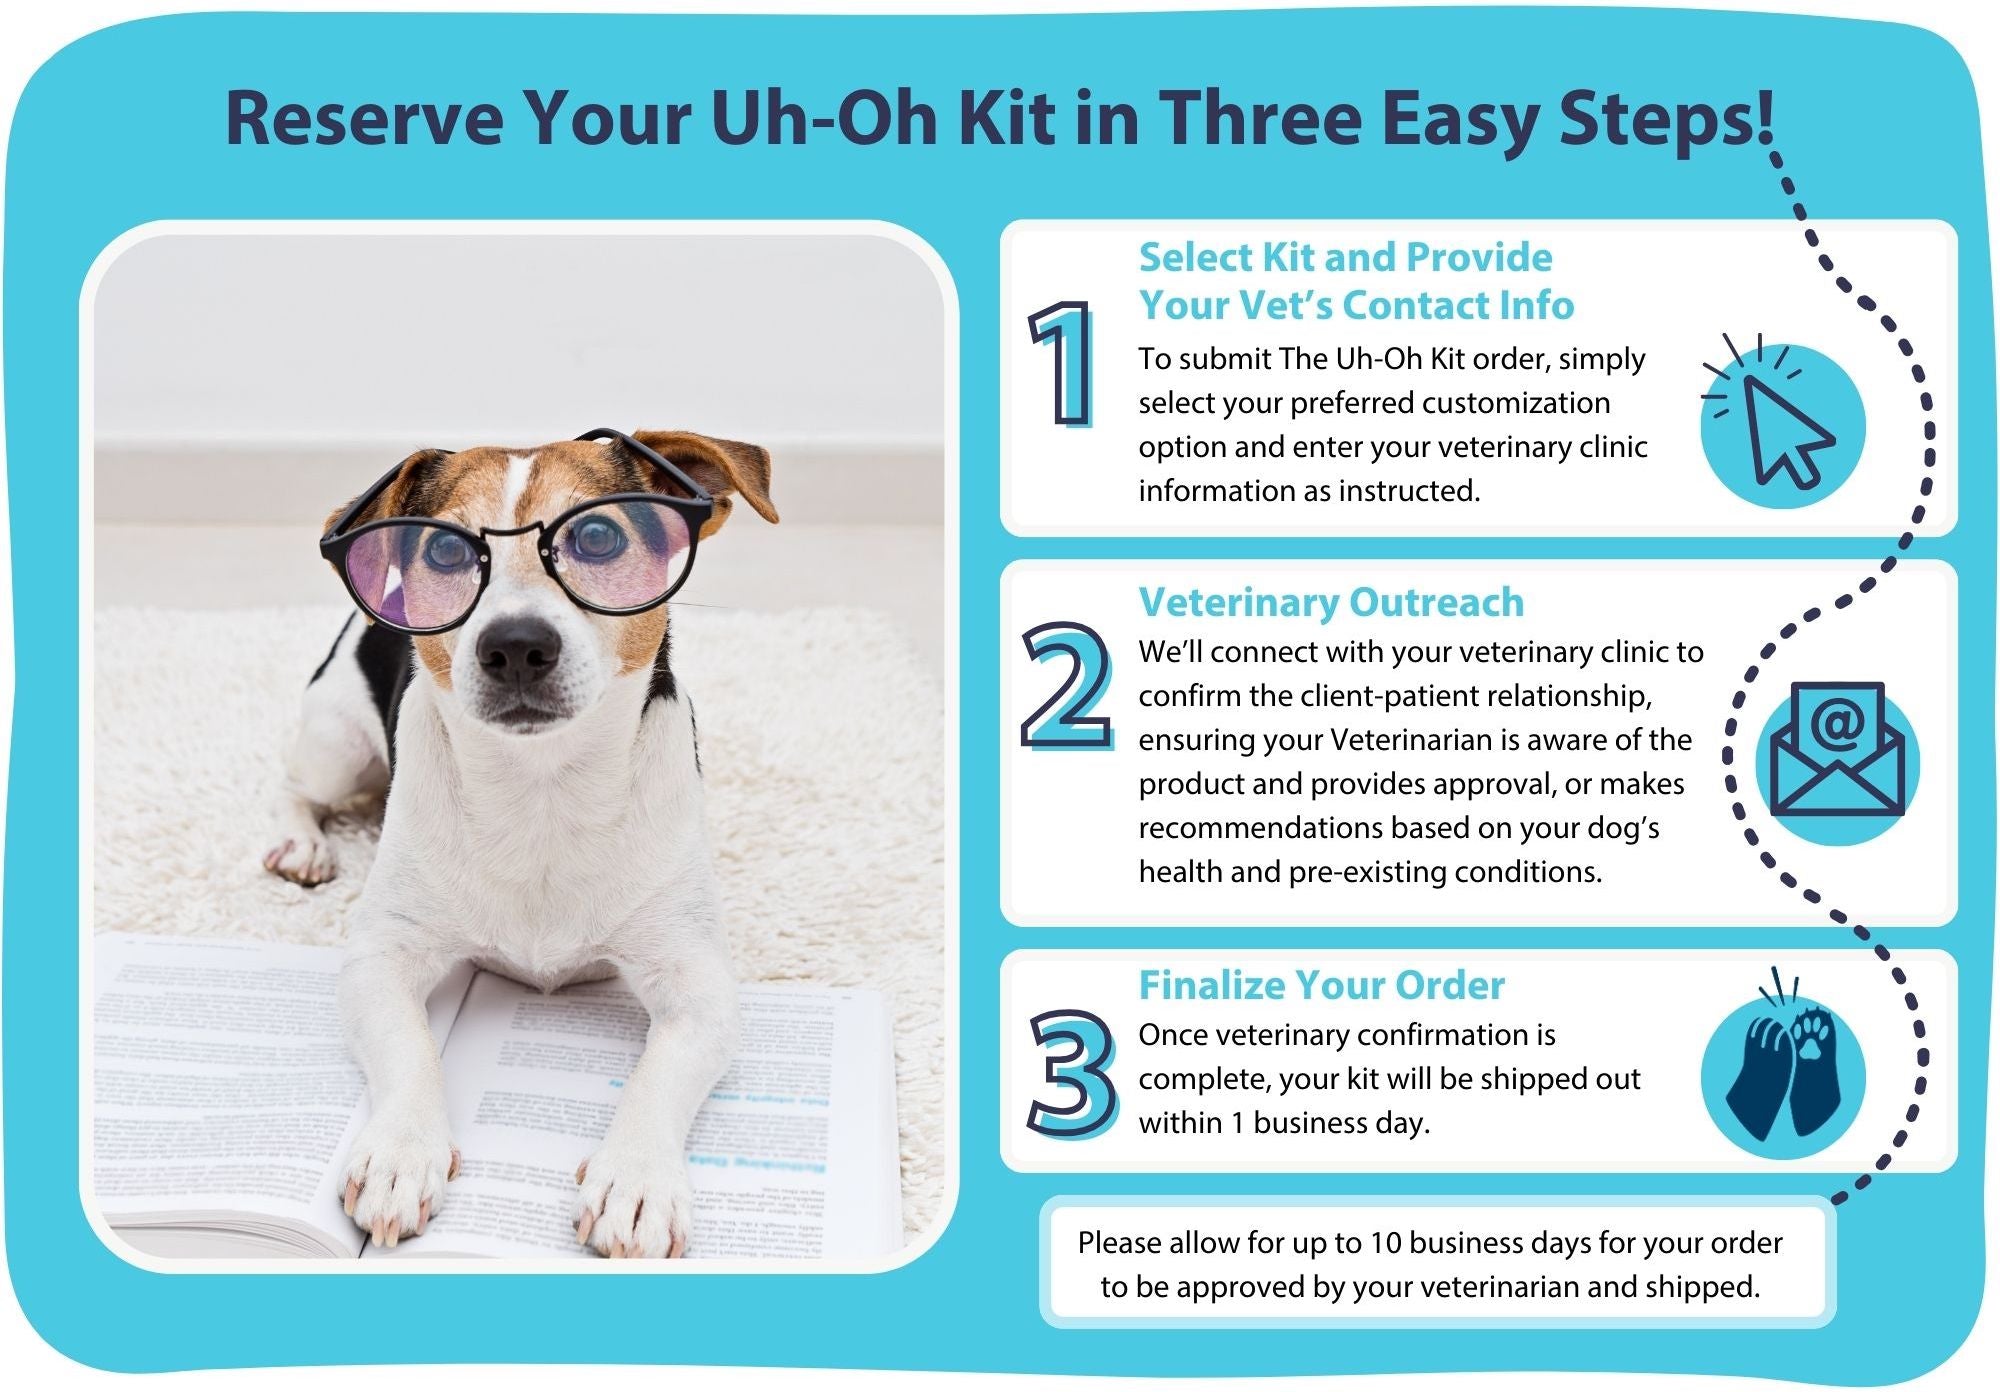 Your order of The Uh-Oh Kit will process within 10 days, as we receive your veterinarian's feedback on the product and recommendations for your canine.